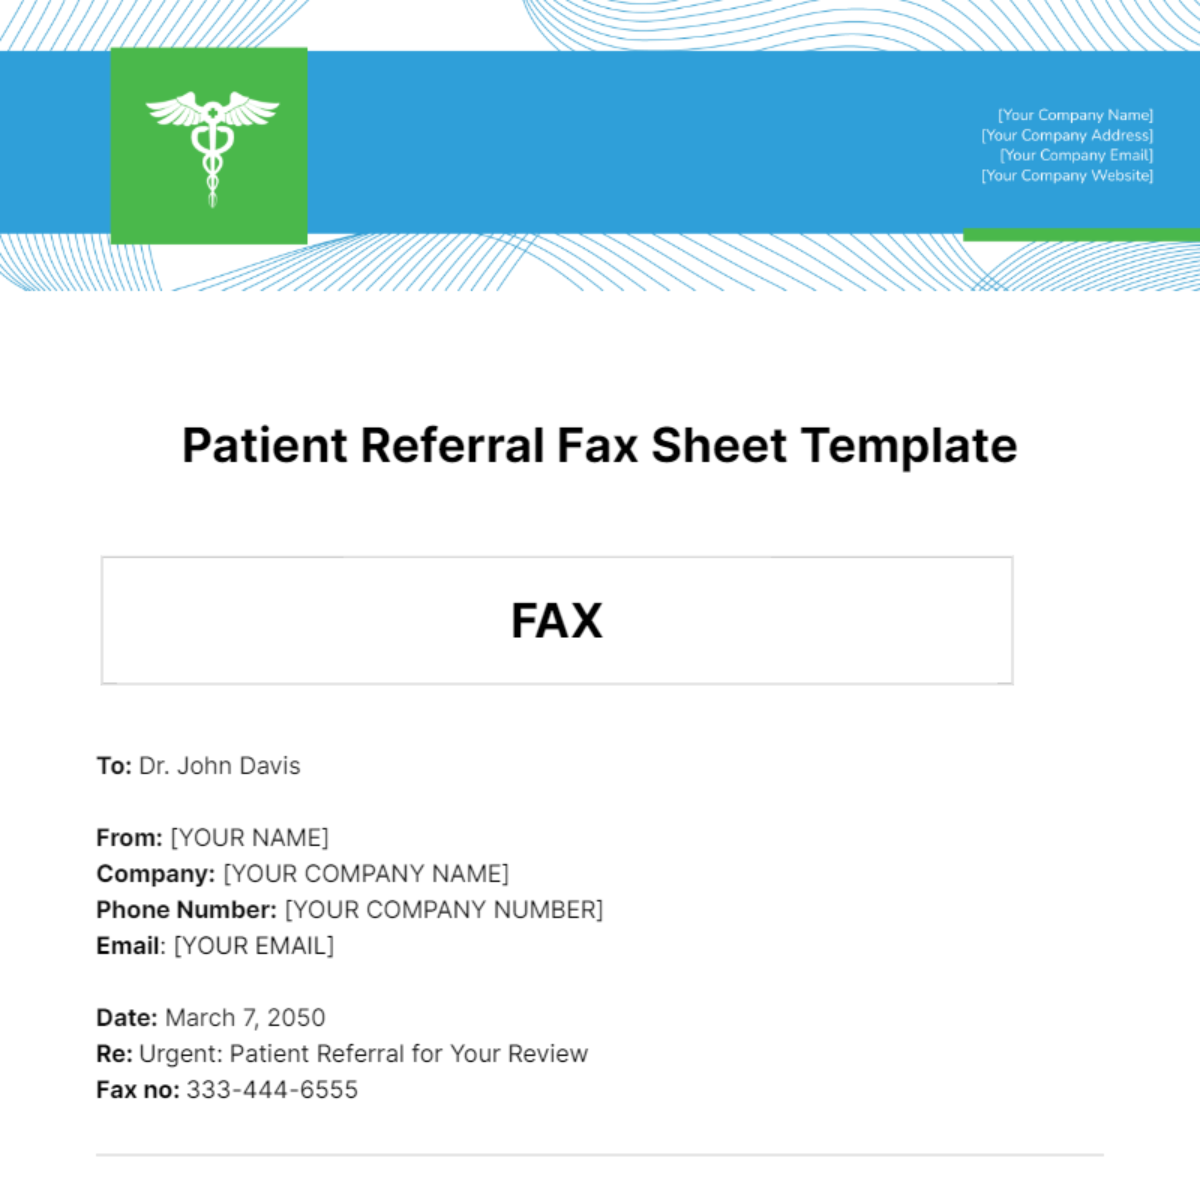 Patient Referral Fax Sheet Template